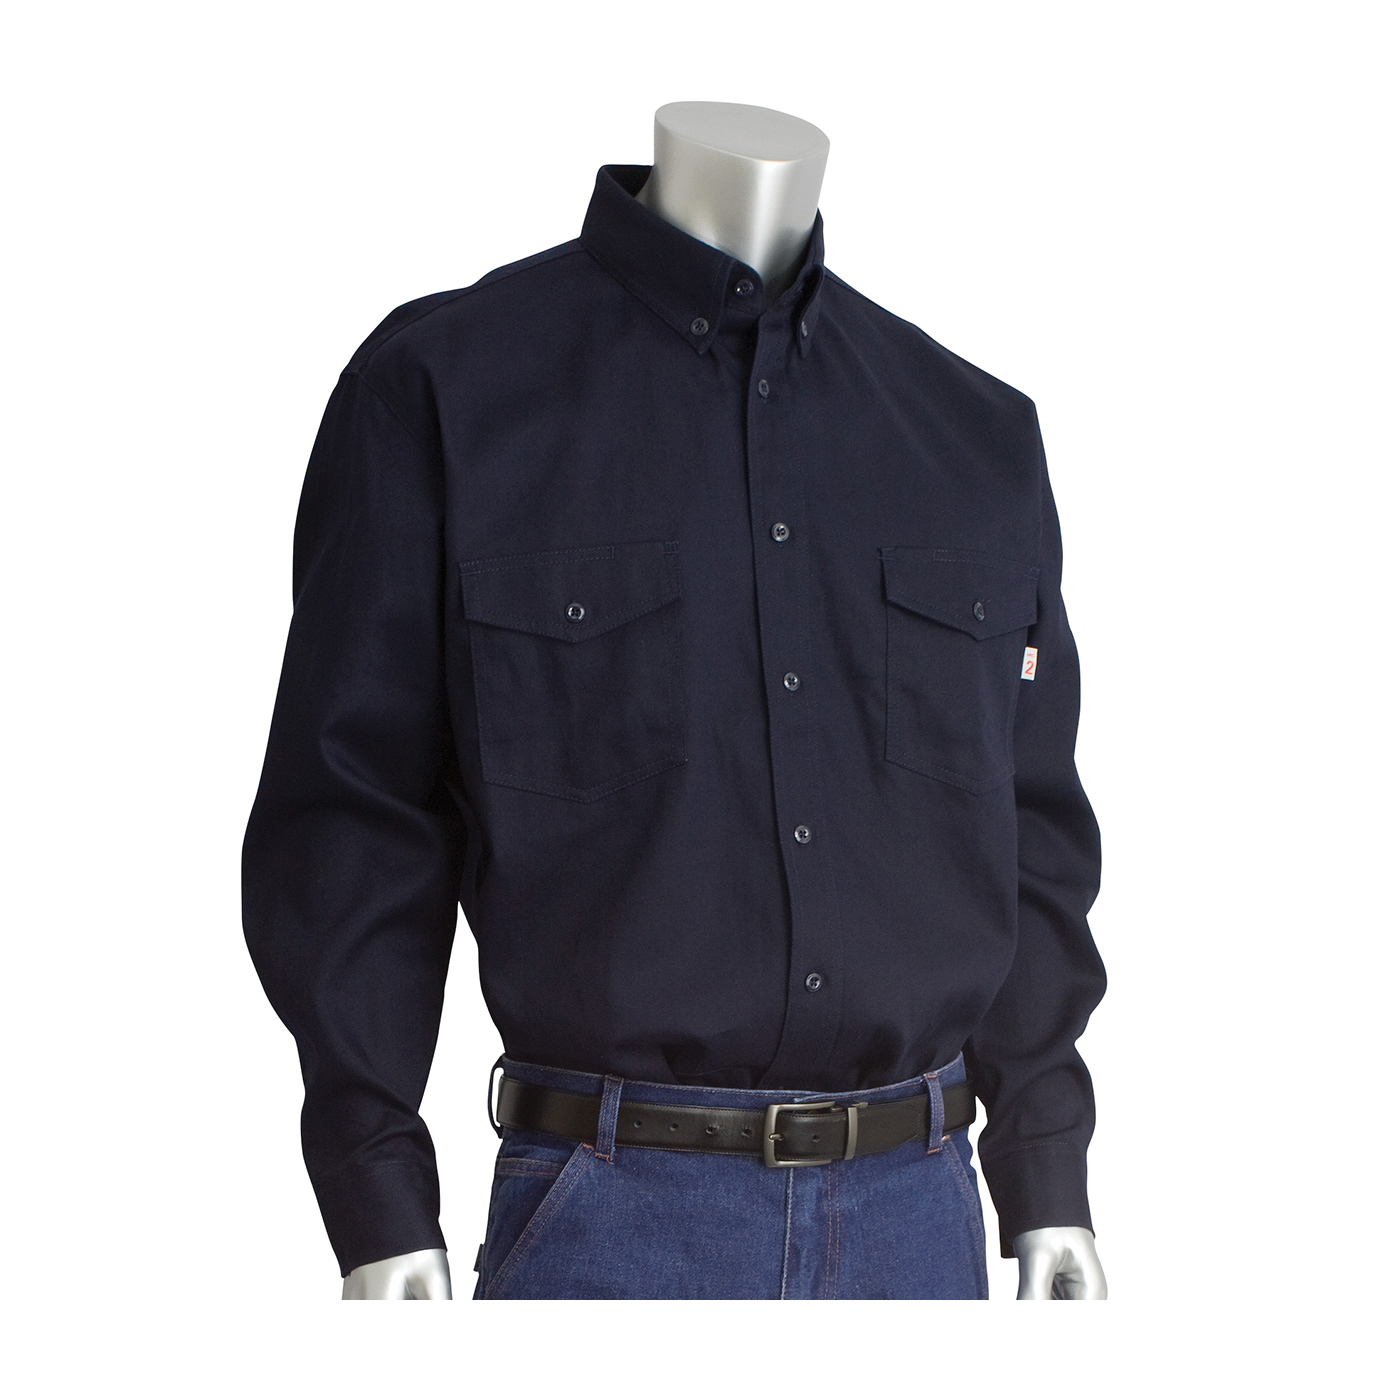 PIP® 385-FRWS-NV/2X Arc and Flame-Resistant Long Sleeve Work Shirt, 2XL, Navy Blue, 34-1/2 in L, 90% Cotton/10% Nylon